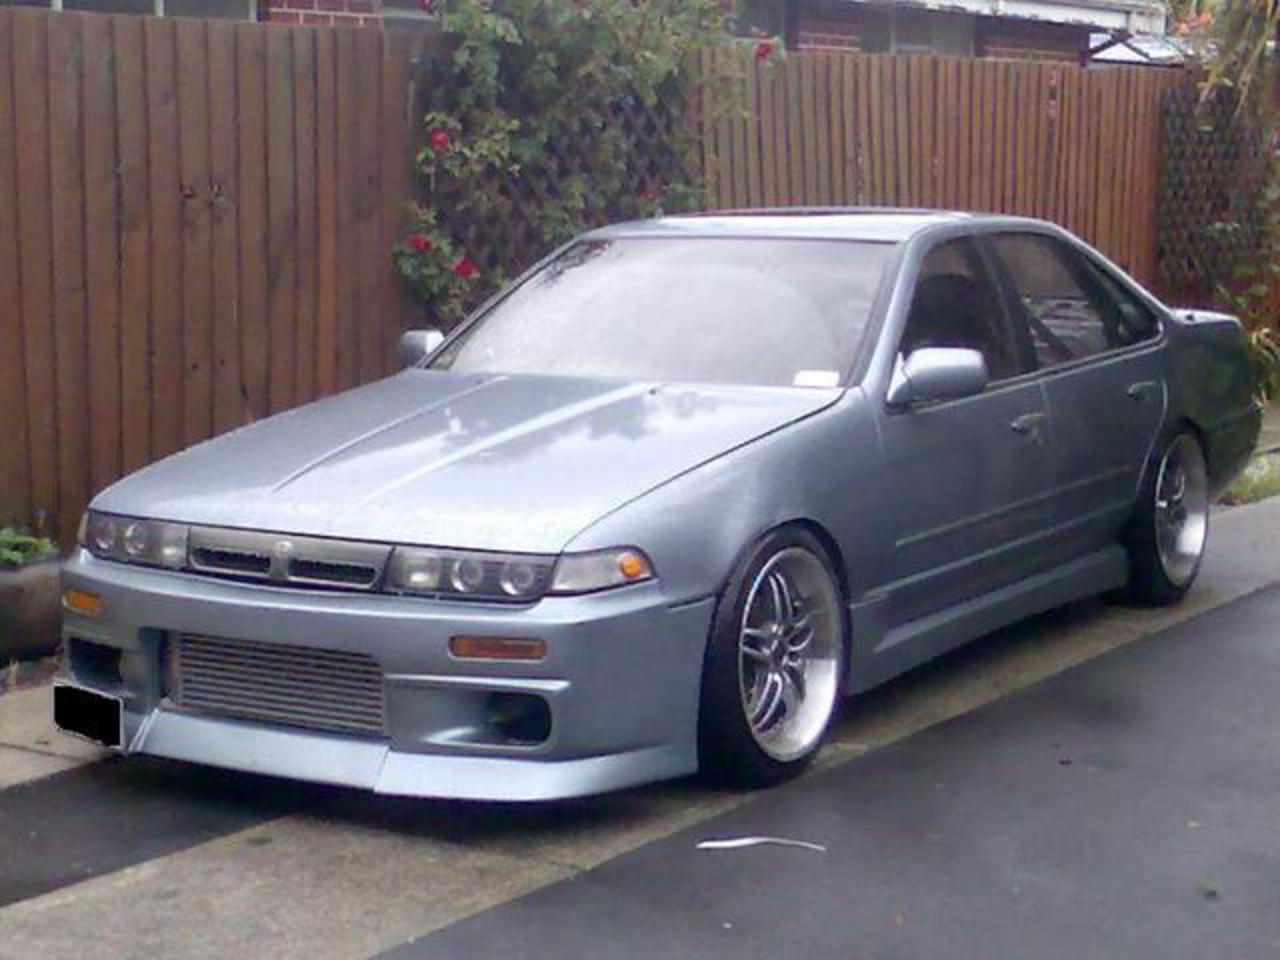 Nissan Cefiro Turbo. View Download Wallpaper. 640x480. Comments